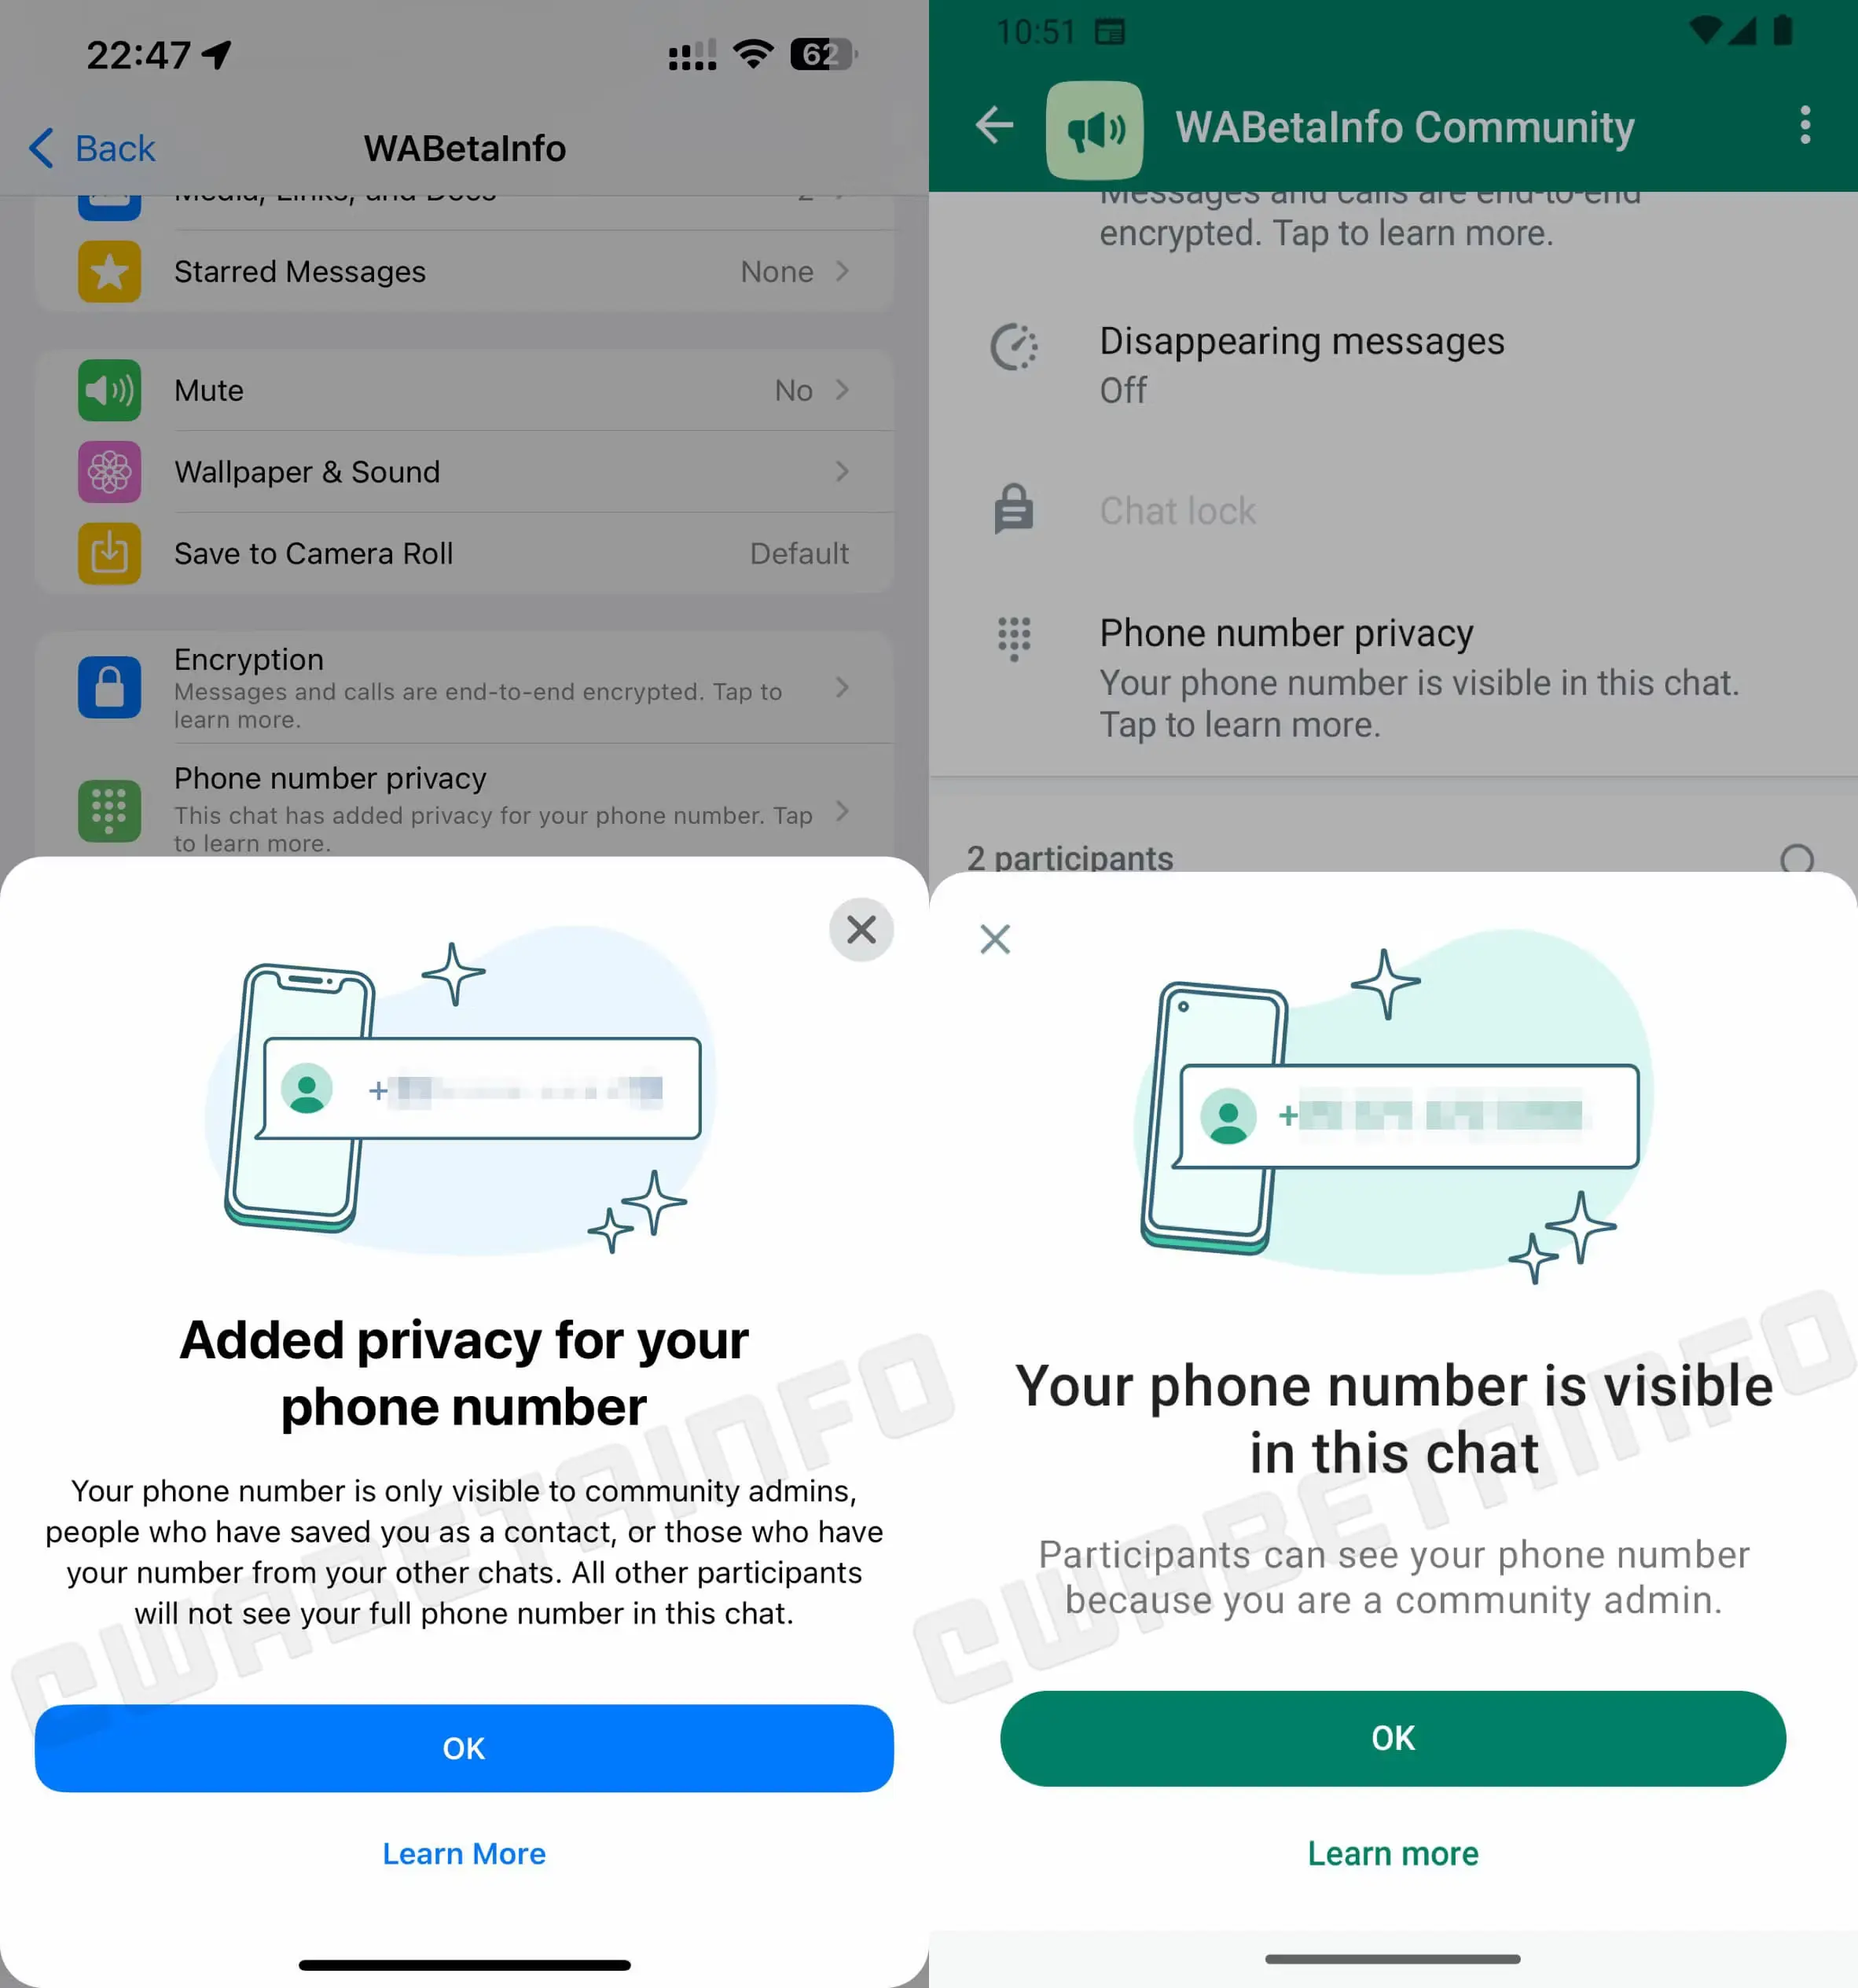 whatsapp-phone-number-privacy-feature-communities-ios-android